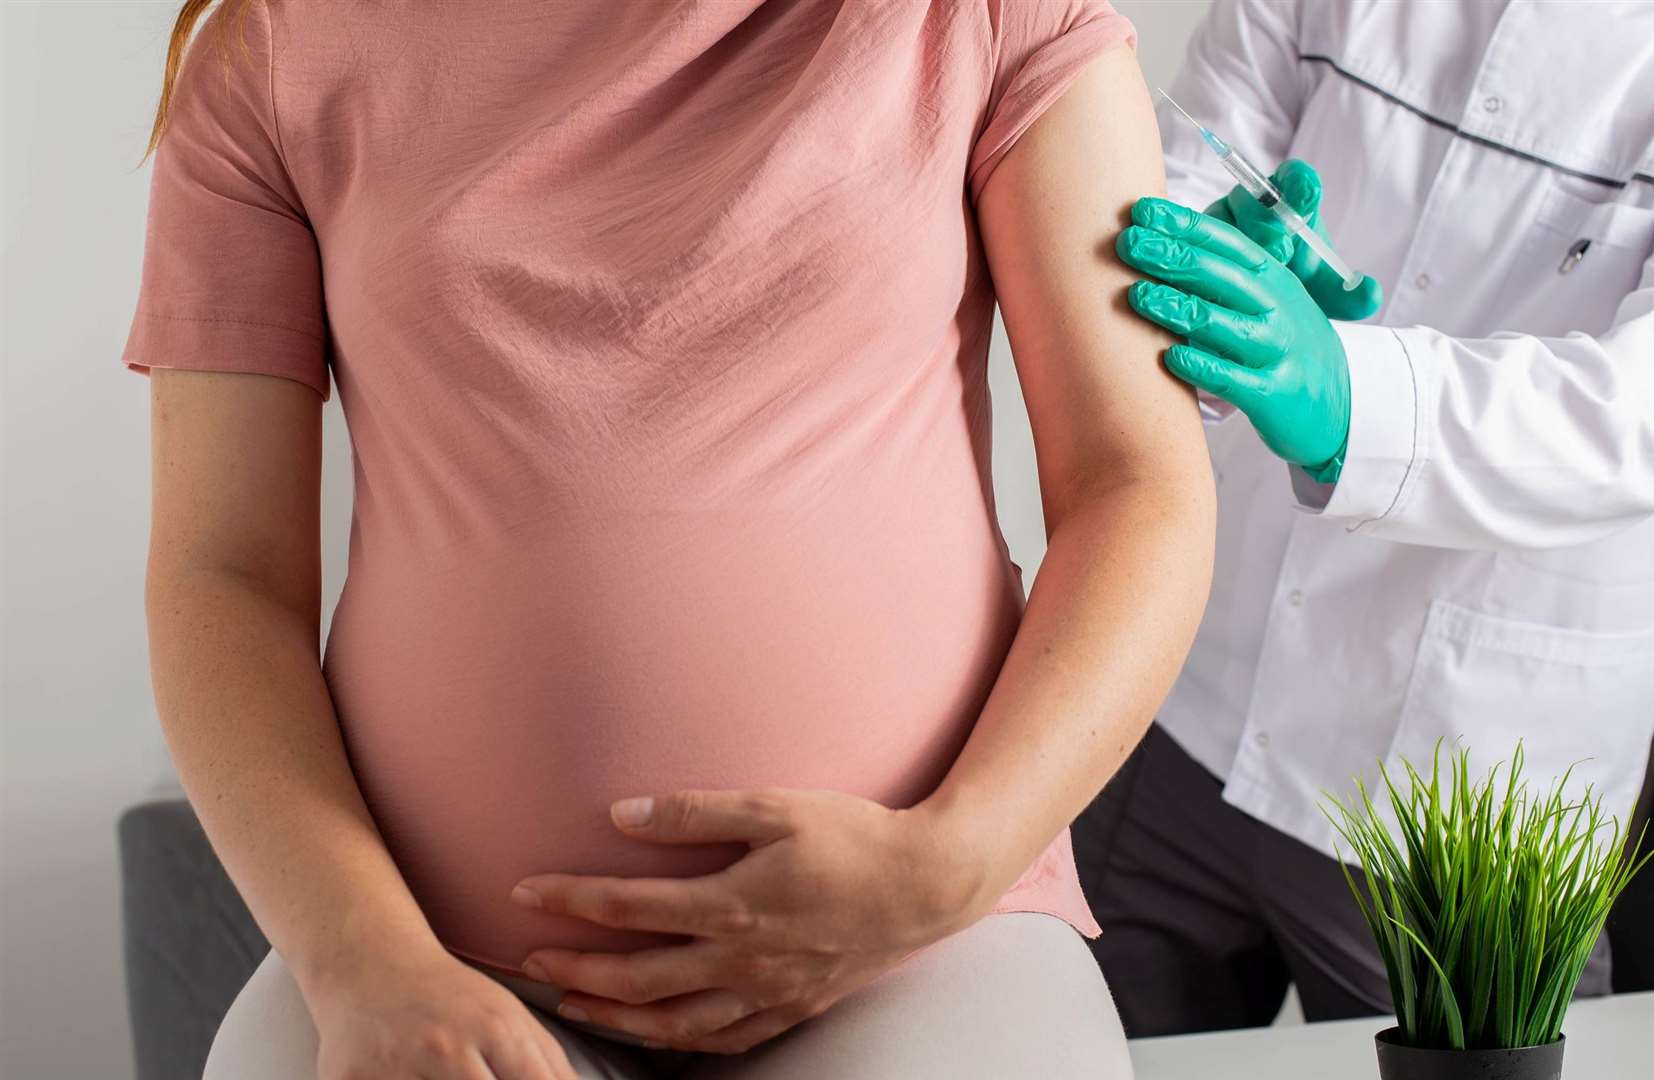 KCC is encouraging pregnant women to come forward for a jab. Image: iStock.